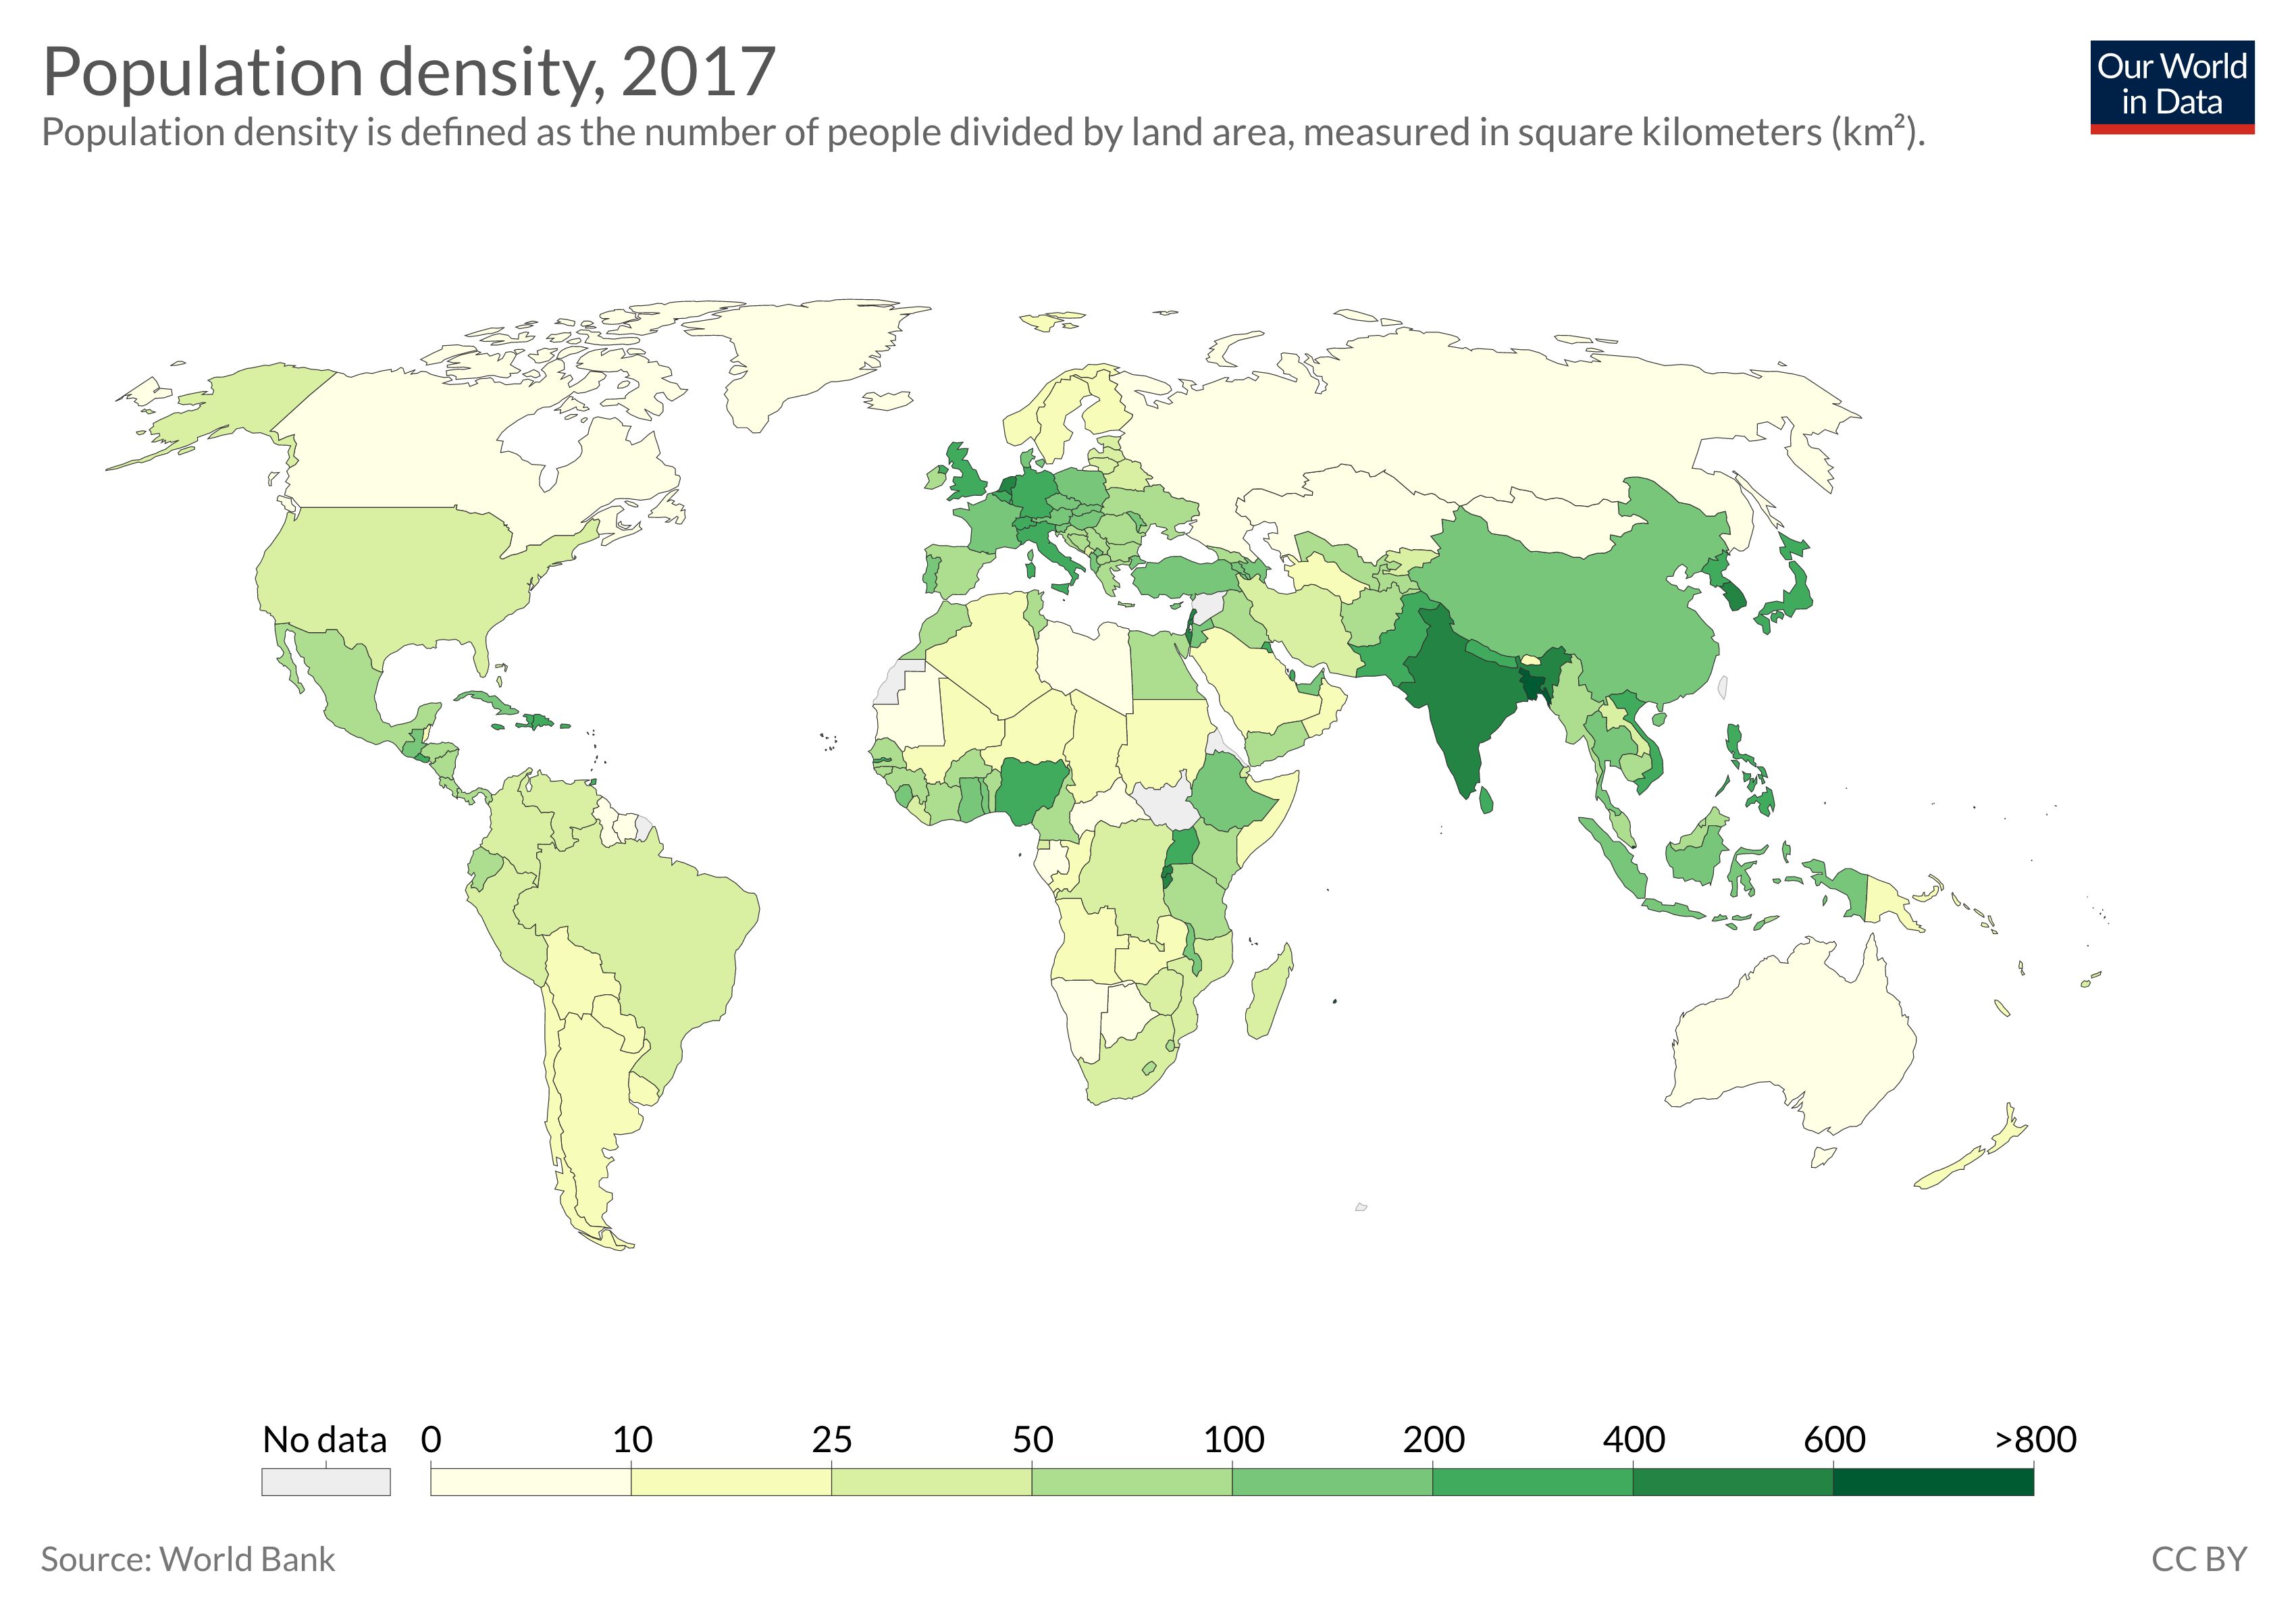 Which countries are most densely populated? - Our World in Data